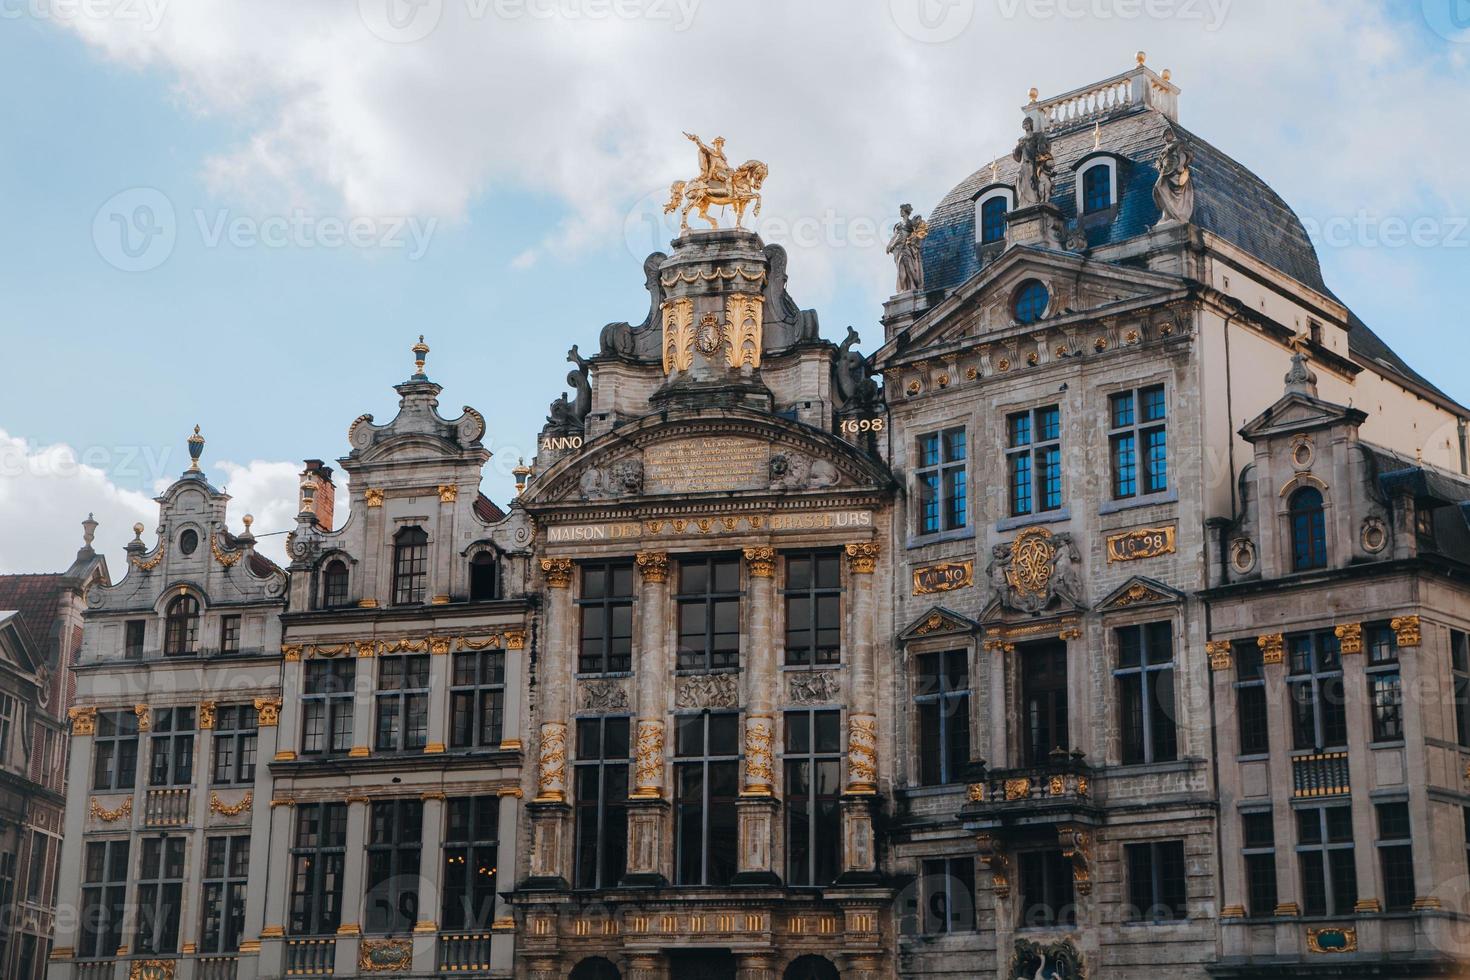 Views from around the city of Brussels, Belgium photo